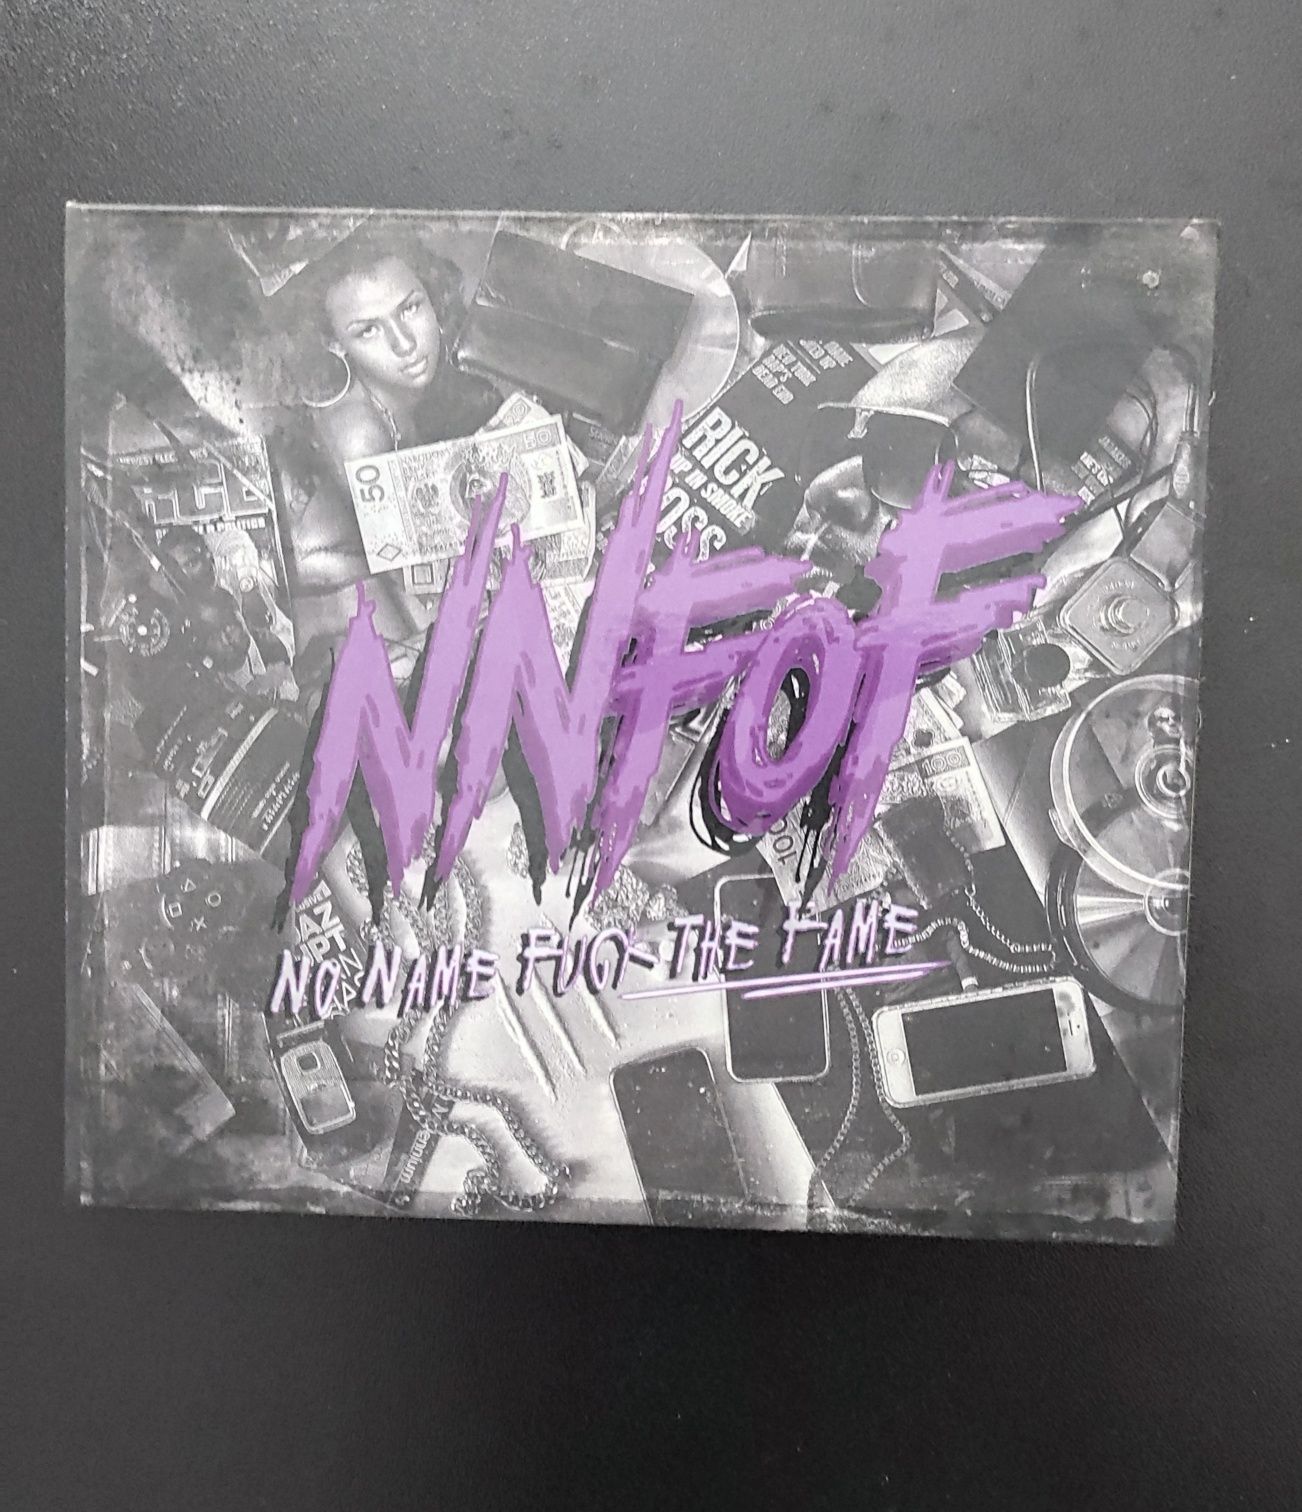 NNFOF - No name fuck the fame